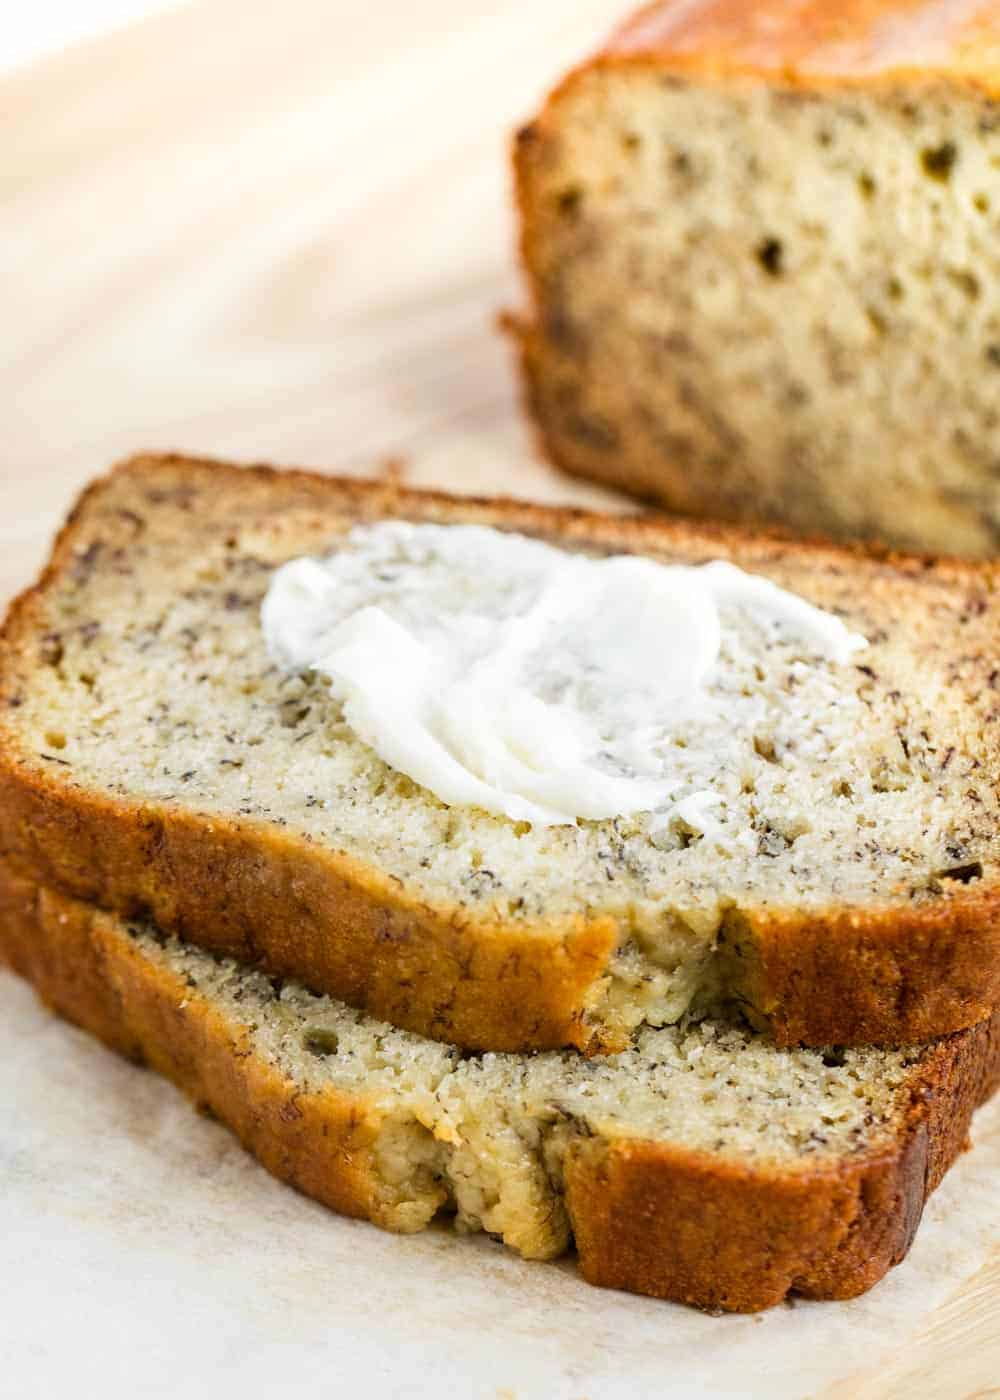 Piece of banana bread with butter on top.